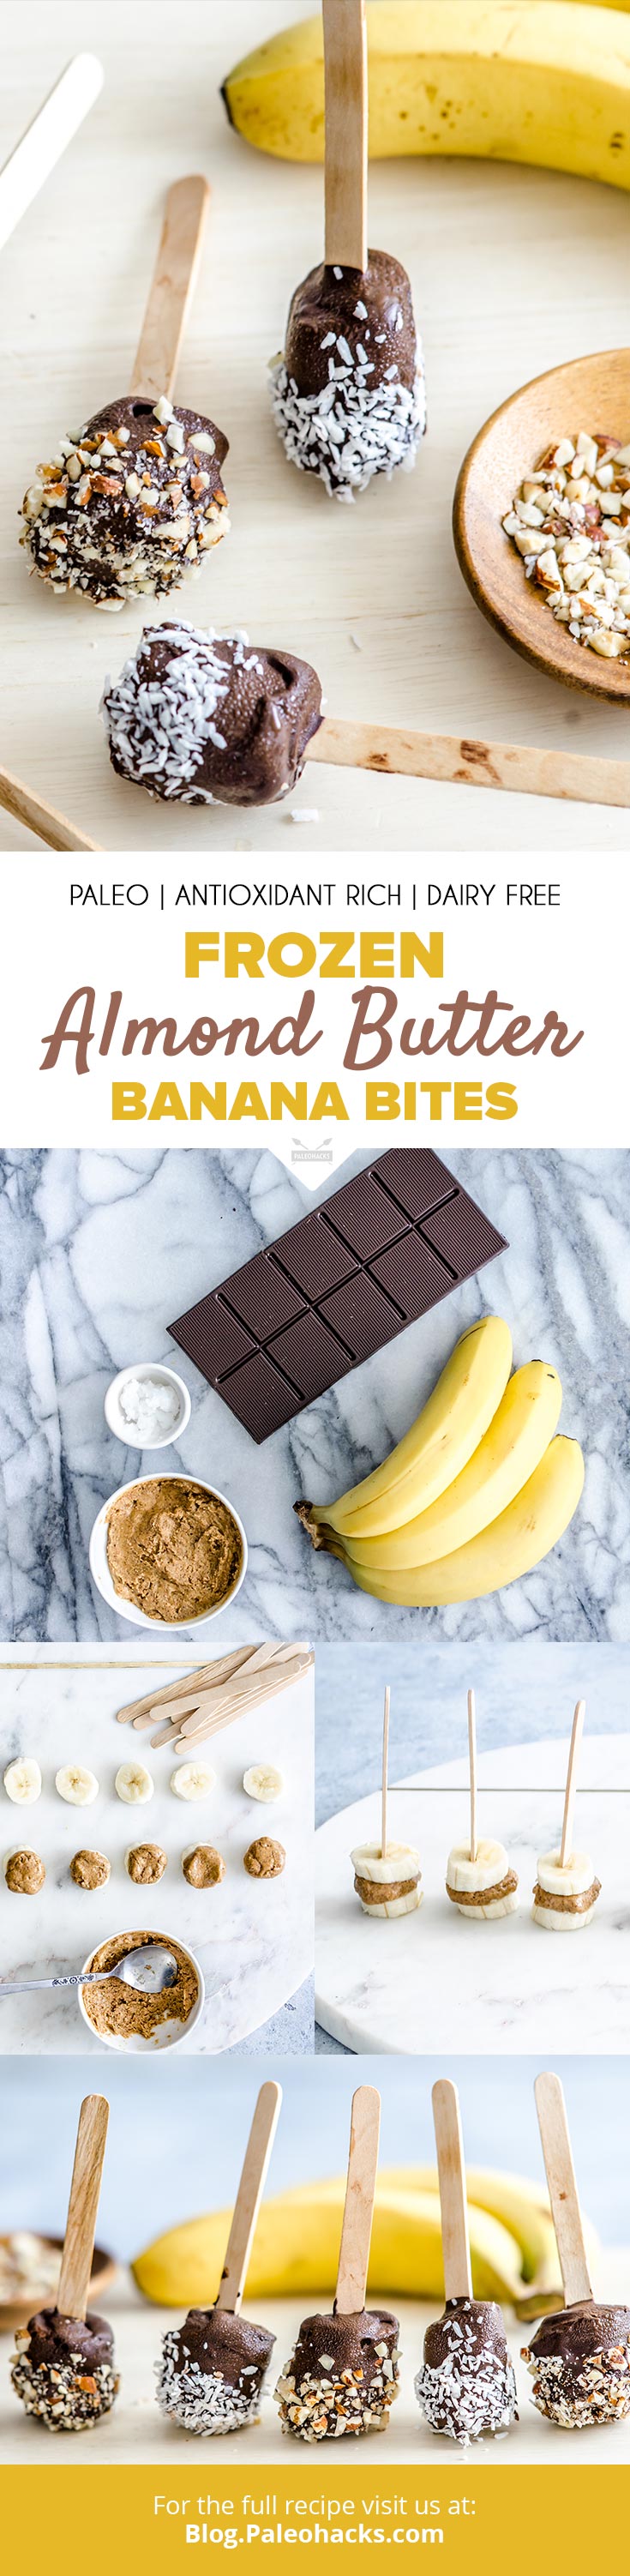 Like a chocolate sundae, but better! Upgrade chocolate covered bananas to Frozen Almond Banana Bites for a treat loaded with healthy antioxidants.